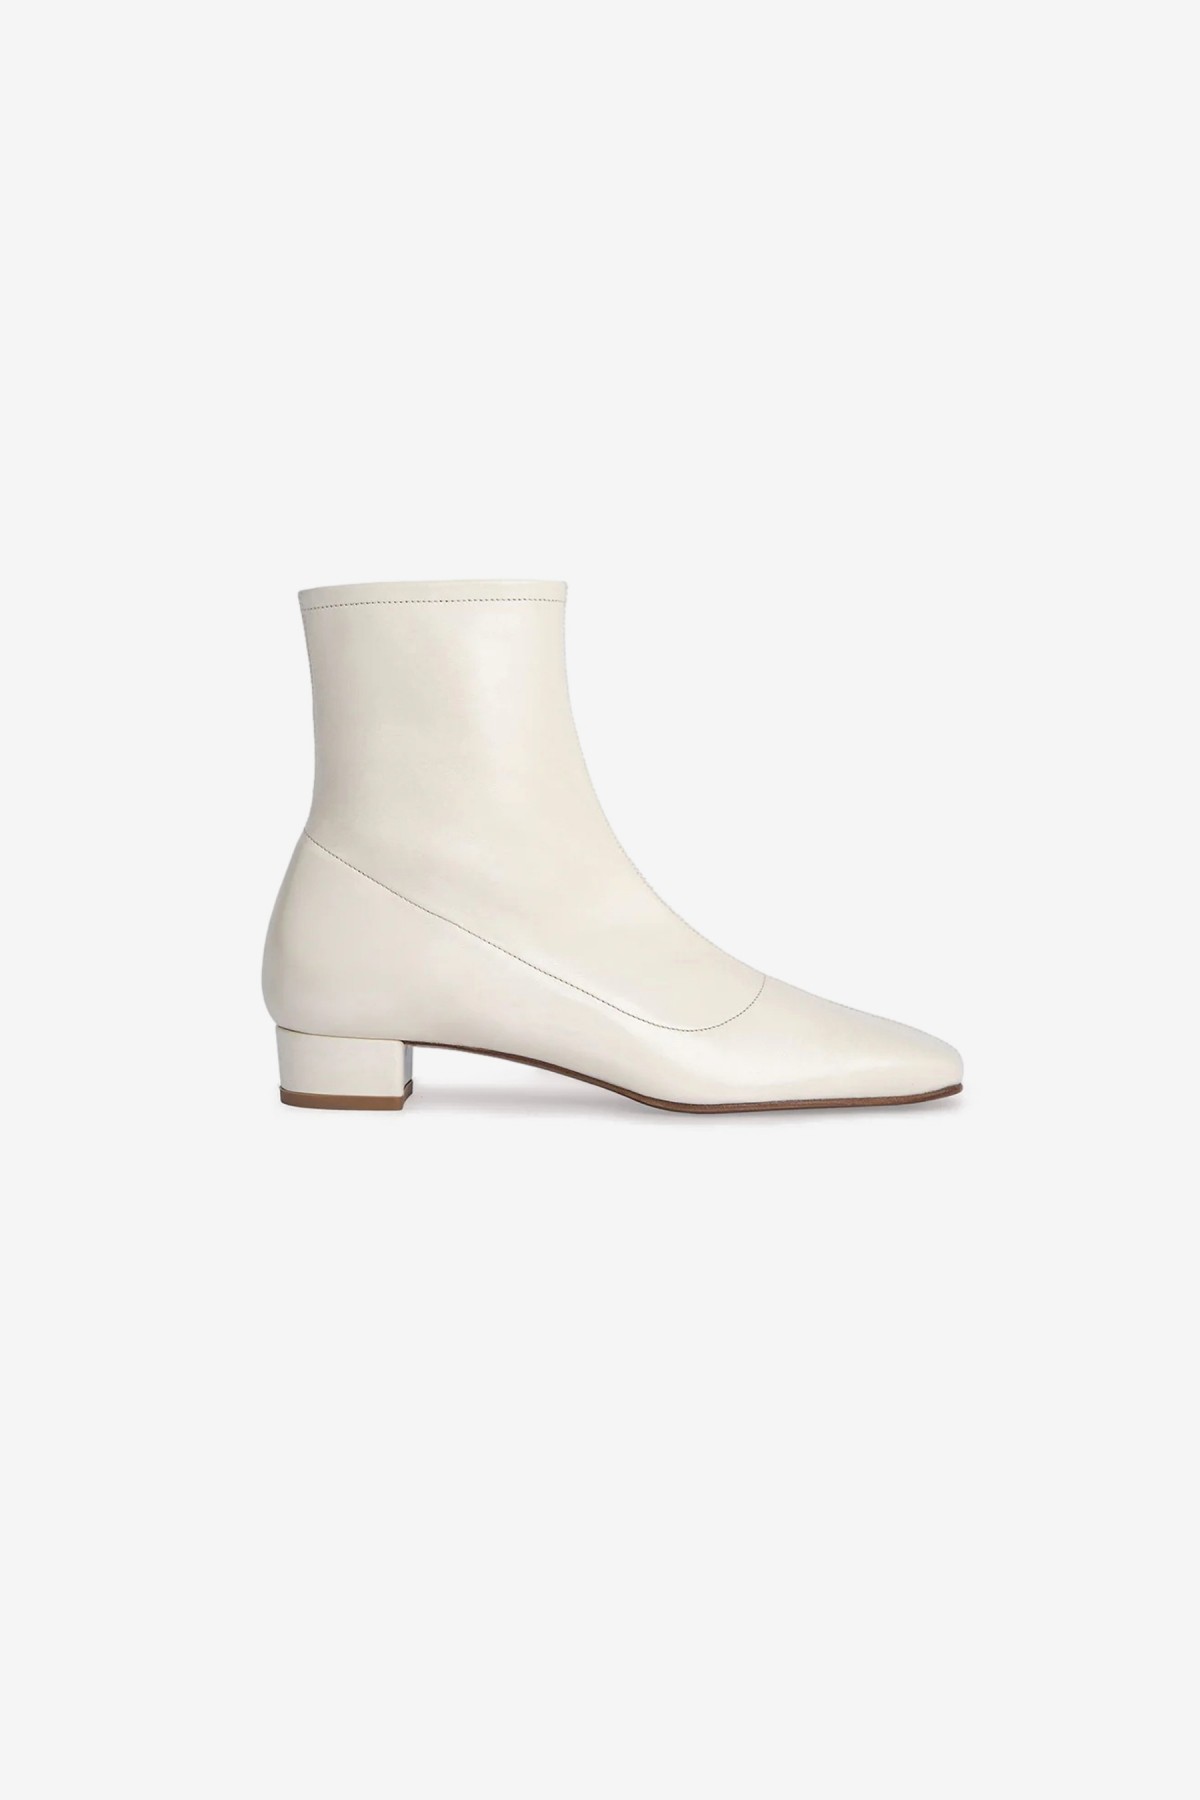 By Far Este Boot White Leather in White